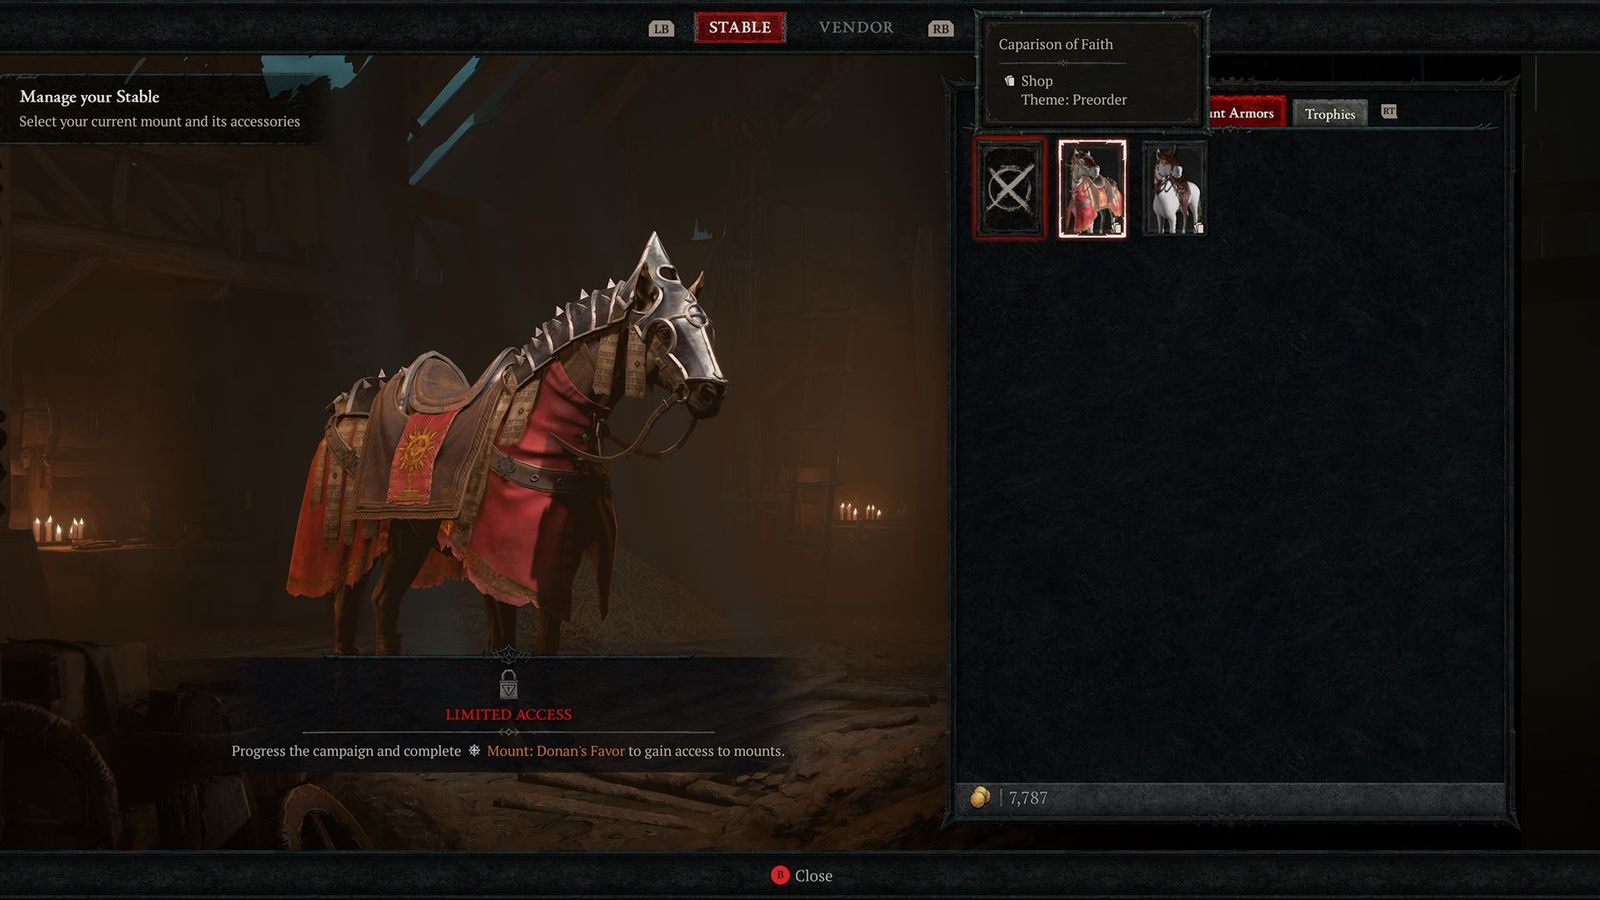 Once you've completed the Act 4 quest to obtain a horse, you can select your preorder bonus mount and mount armor.